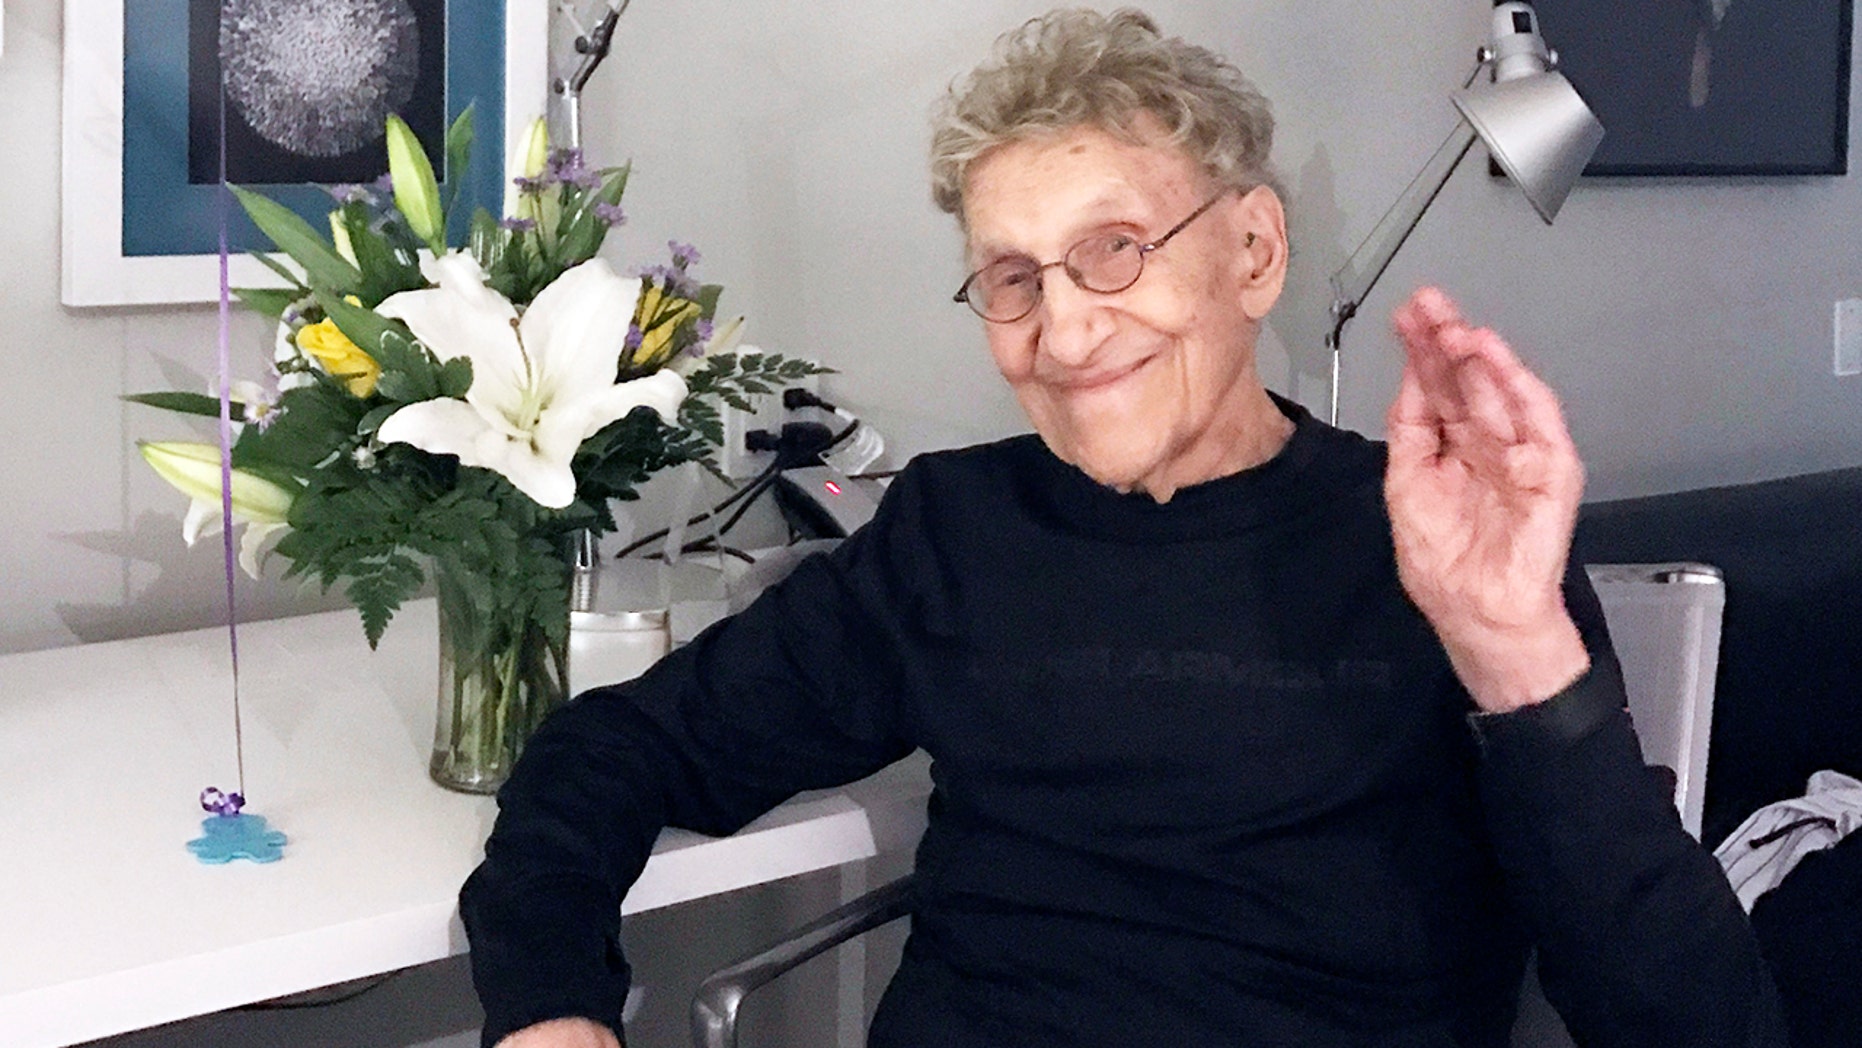 This Feb. 7, 2017 photo provided by Suzanne Shore shows her husband, Sammy Shore. The actor and standup comedian who co-founded the Comedy Store died Saturday, May 18, 2019. He was 92.